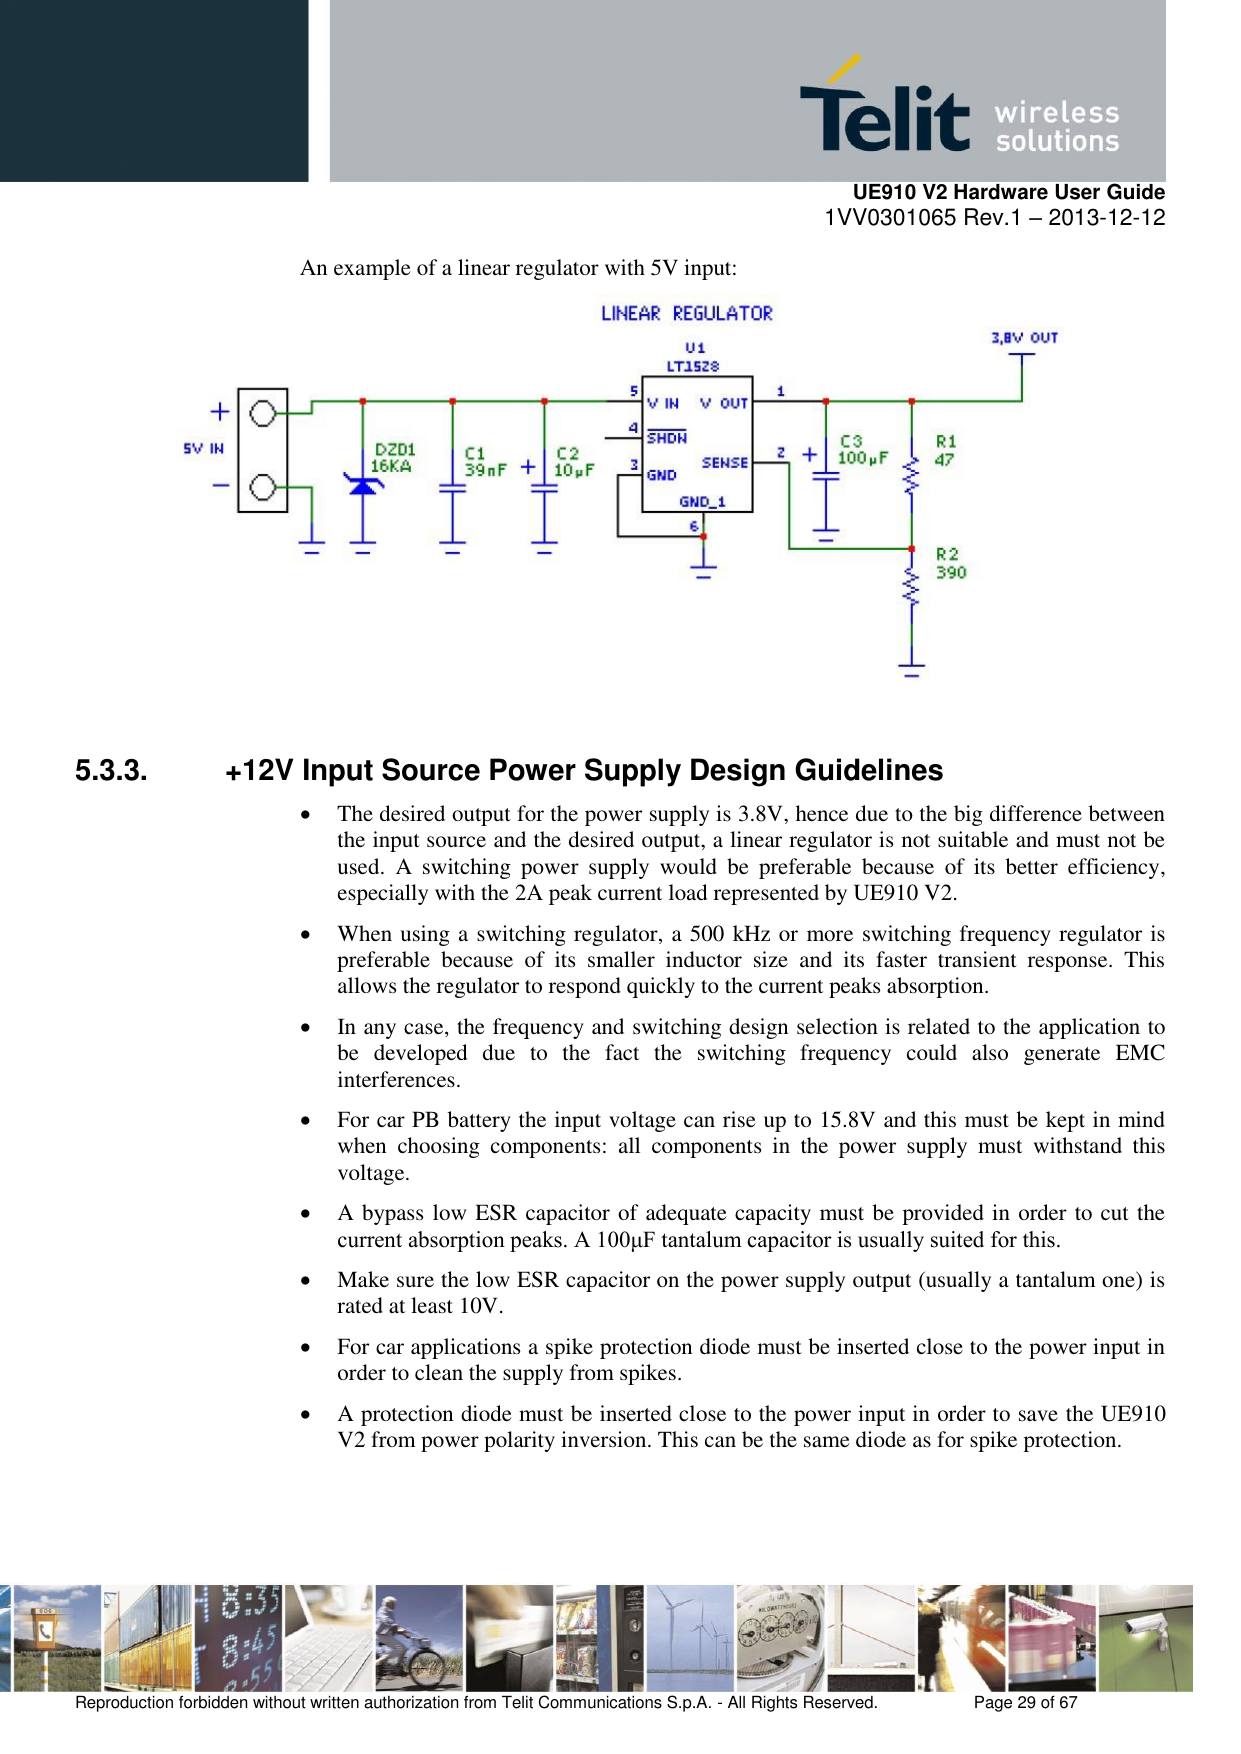     UE910 V2 Hardware User Guide 1VV0301065 Rev.1 – 2013-12-12  Reproduction forbidden without written authorization from Telit Communications S.p.A. - All Rights Reserved.    Page 29 of 67                                                     An example of a linear regulator with 5V input:   5.3.3.  +12V Input Source Power Supply Design Guidelines  The desired output for the power supply is 3.8V, hence due to the big difference between the input source and the desired output, a linear regulator is not suitable and must not be used.  A  switching  power  supply  would  be  preferable  because  of  its  better  efficiency, especially with the 2A peak current load represented by UE910 V2.  When using a switching regulator, a 500 kHz or more switching frequency regulator is preferable  because  of  its  smaller  inductor  size  and  its  faster  transient  response.  This allows the regulator to respond quickly to the current peaks absorption.   In any case, the frequency and switching design selection is related to the application to be  developed  due  to  the  fact  the  switching  frequency  could  also  generate  EMC interferences.  For car PB battery the input voltage can rise up to 15.8V and this must be kept in mind when  choosing  components:  all  components  in  the  power  supply  must  withstand  this voltage.  A bypass low ESR capacitor of adequate capacity must be provided in order to cut the current absorption peaks. A 100μF tantalum capacitor is usually suited for this.  Make sure the low ESR capacitor on the power supply output (usually a tantalum one) is rated at least 10V.  For car applications a spike protection diode must be inserted close to the power input in order to clean the supply from spikes.   A protection diode must be inserted close to the power input in order to save the UE910 V2 from power polarity inversion. This can be the same diode as for spike protection.   